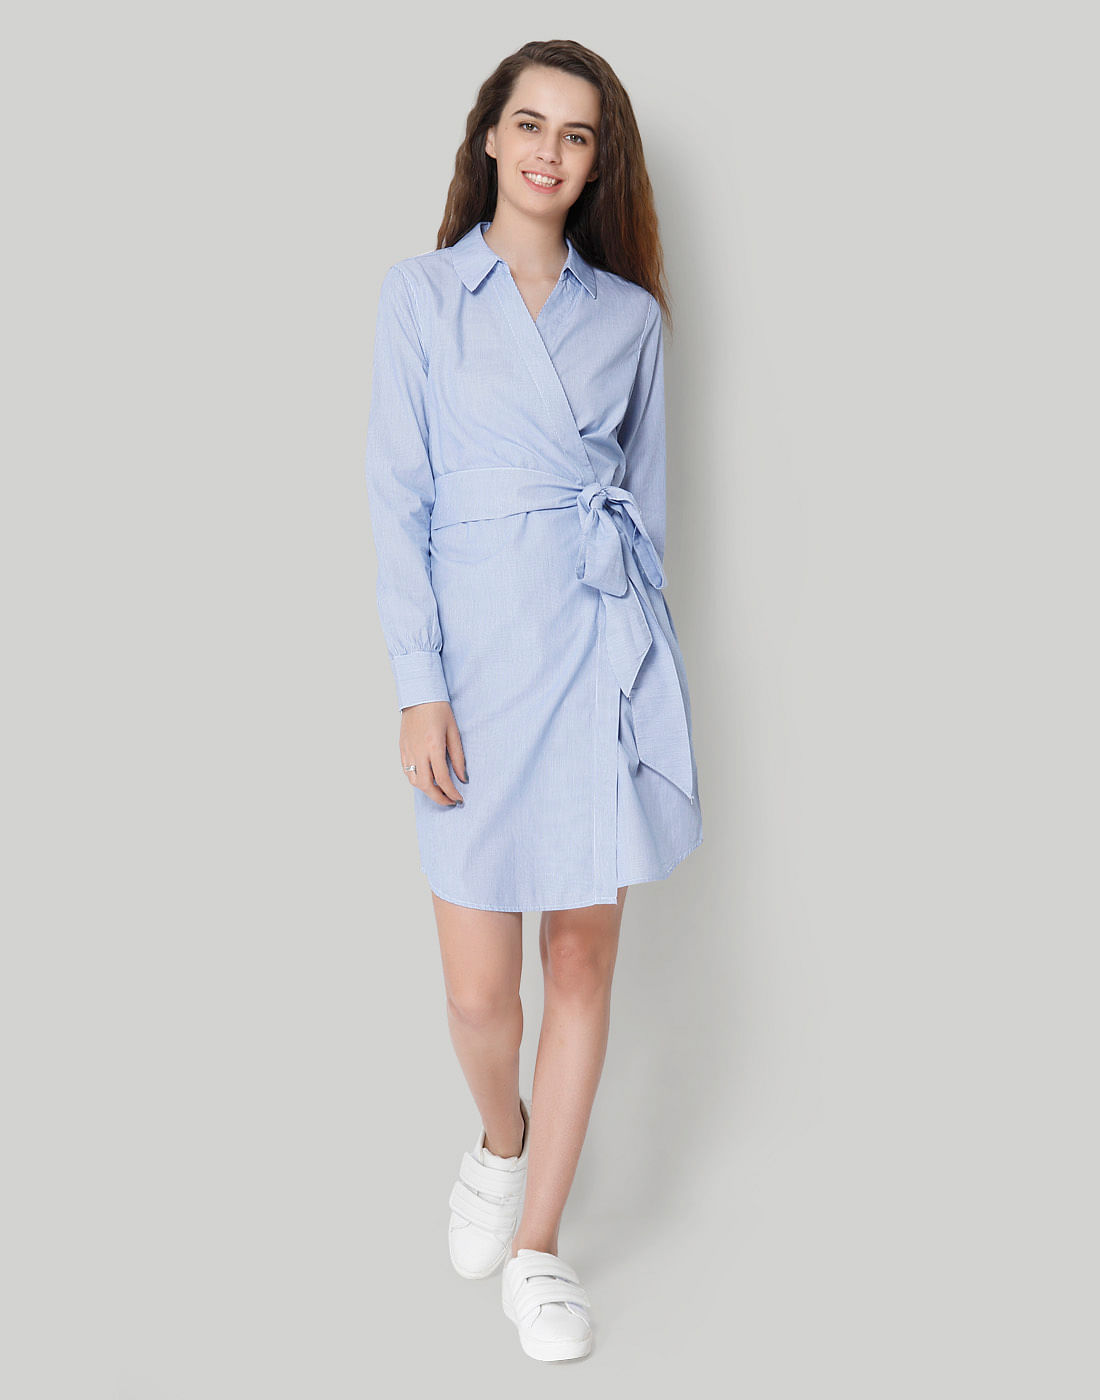 full sleeves one piece dress online